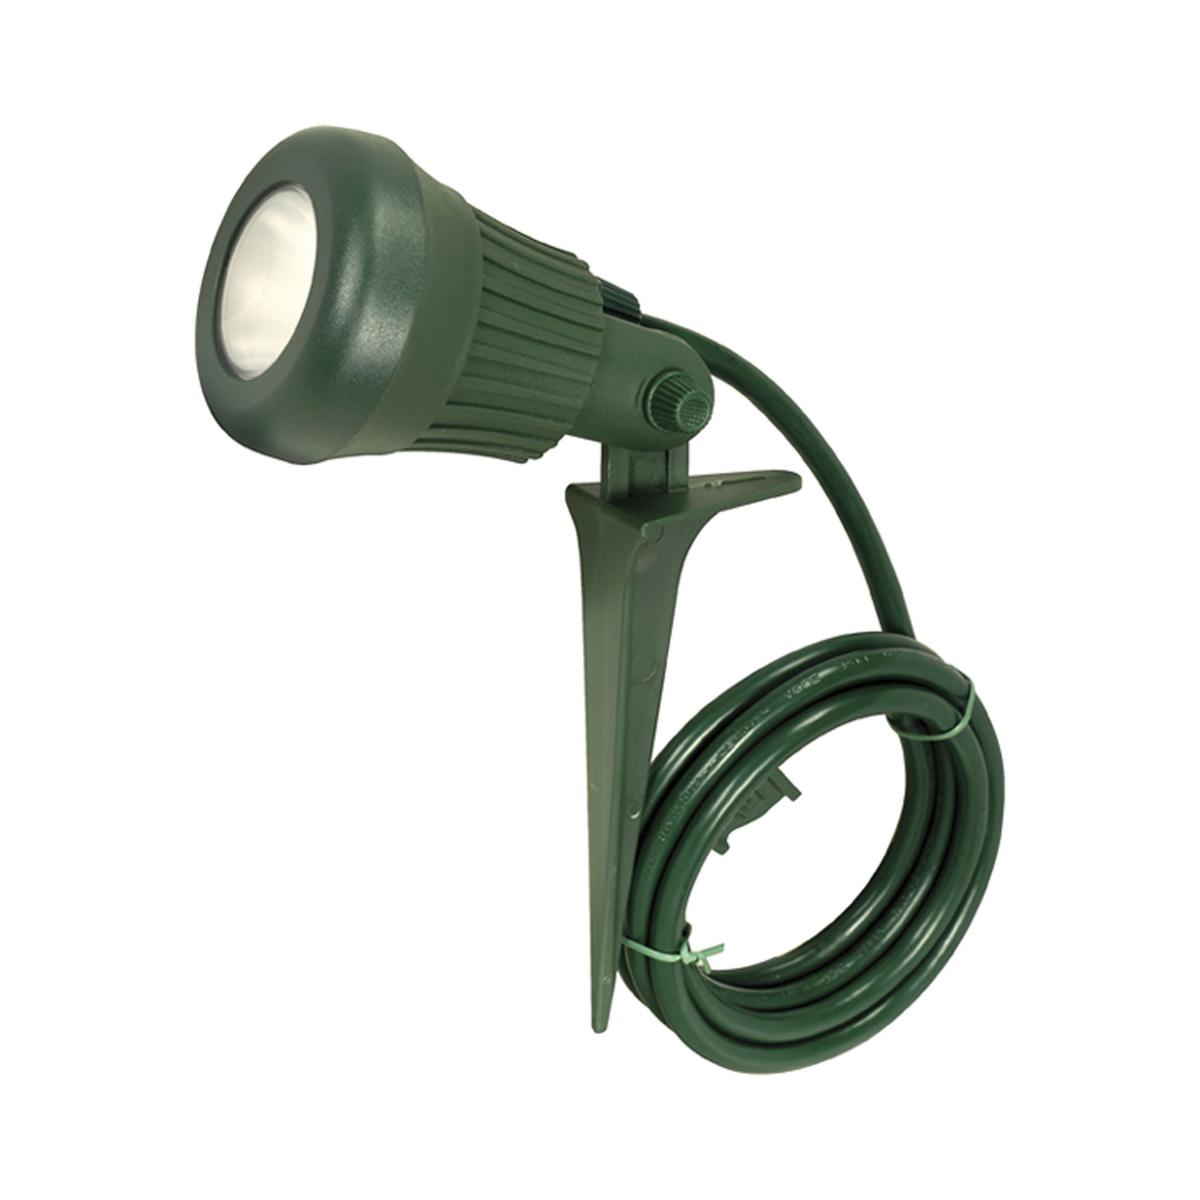 Satco 93-5058 6 Foot 3.4watt 5 LED Plastic Flood Light With Ground Stake And Plug Green Finish For Outdoor Use Head Pivots 180 Degrees